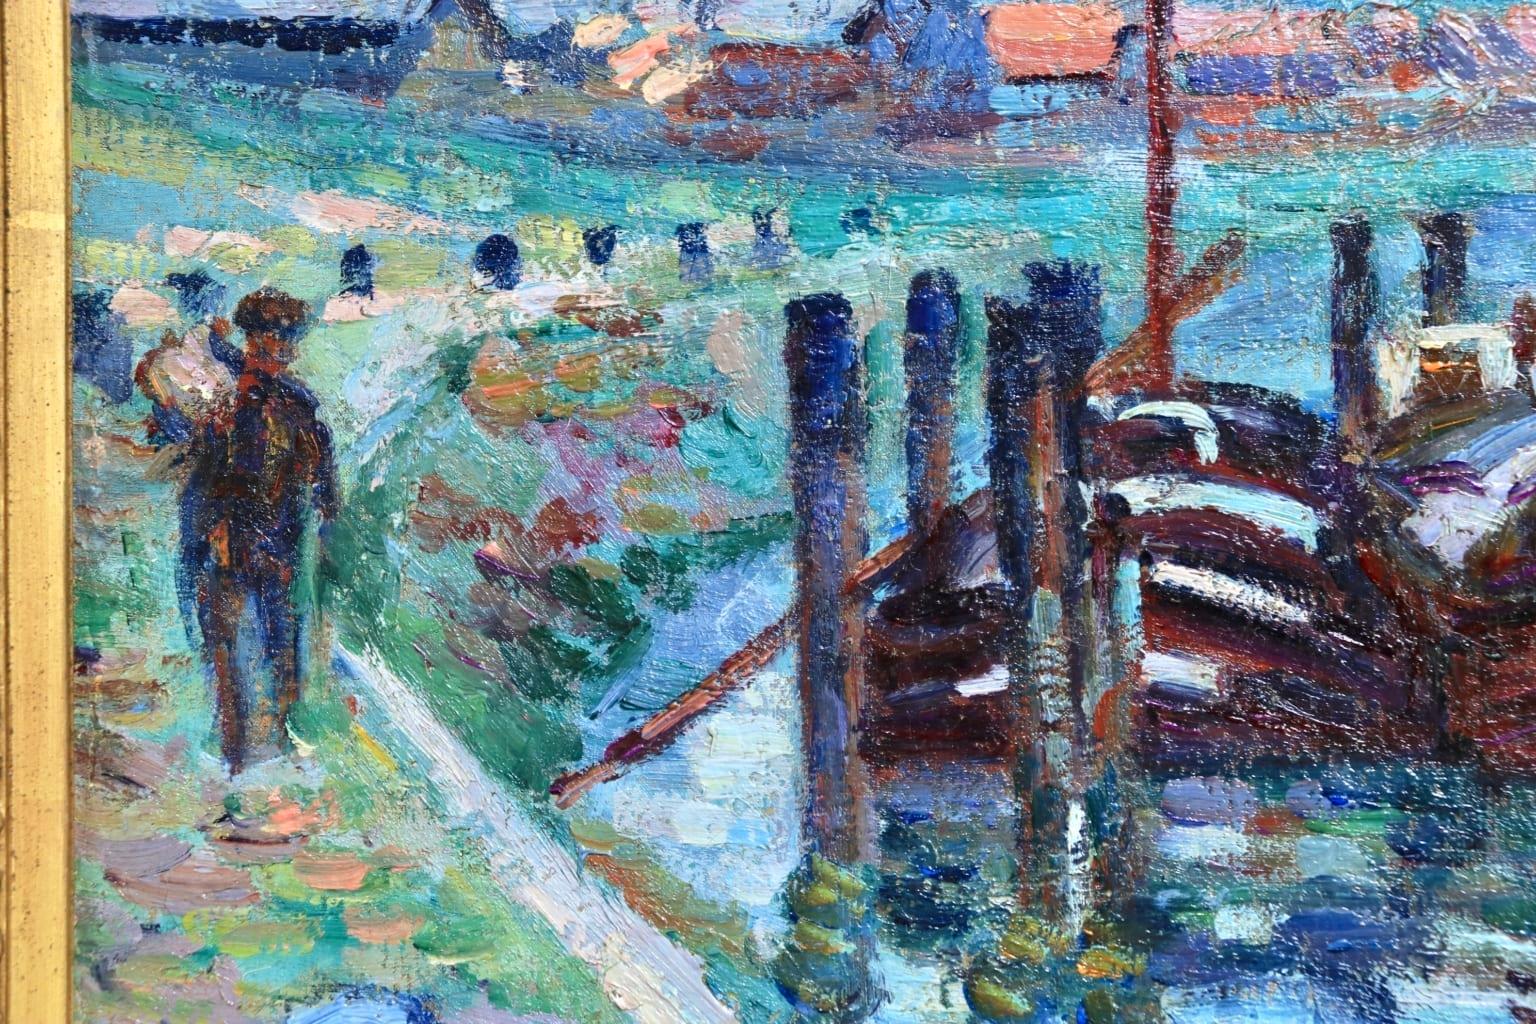 Morning Rouen - Impressionist Oil, Boats on River Landscape by Armand Guillaumin 3